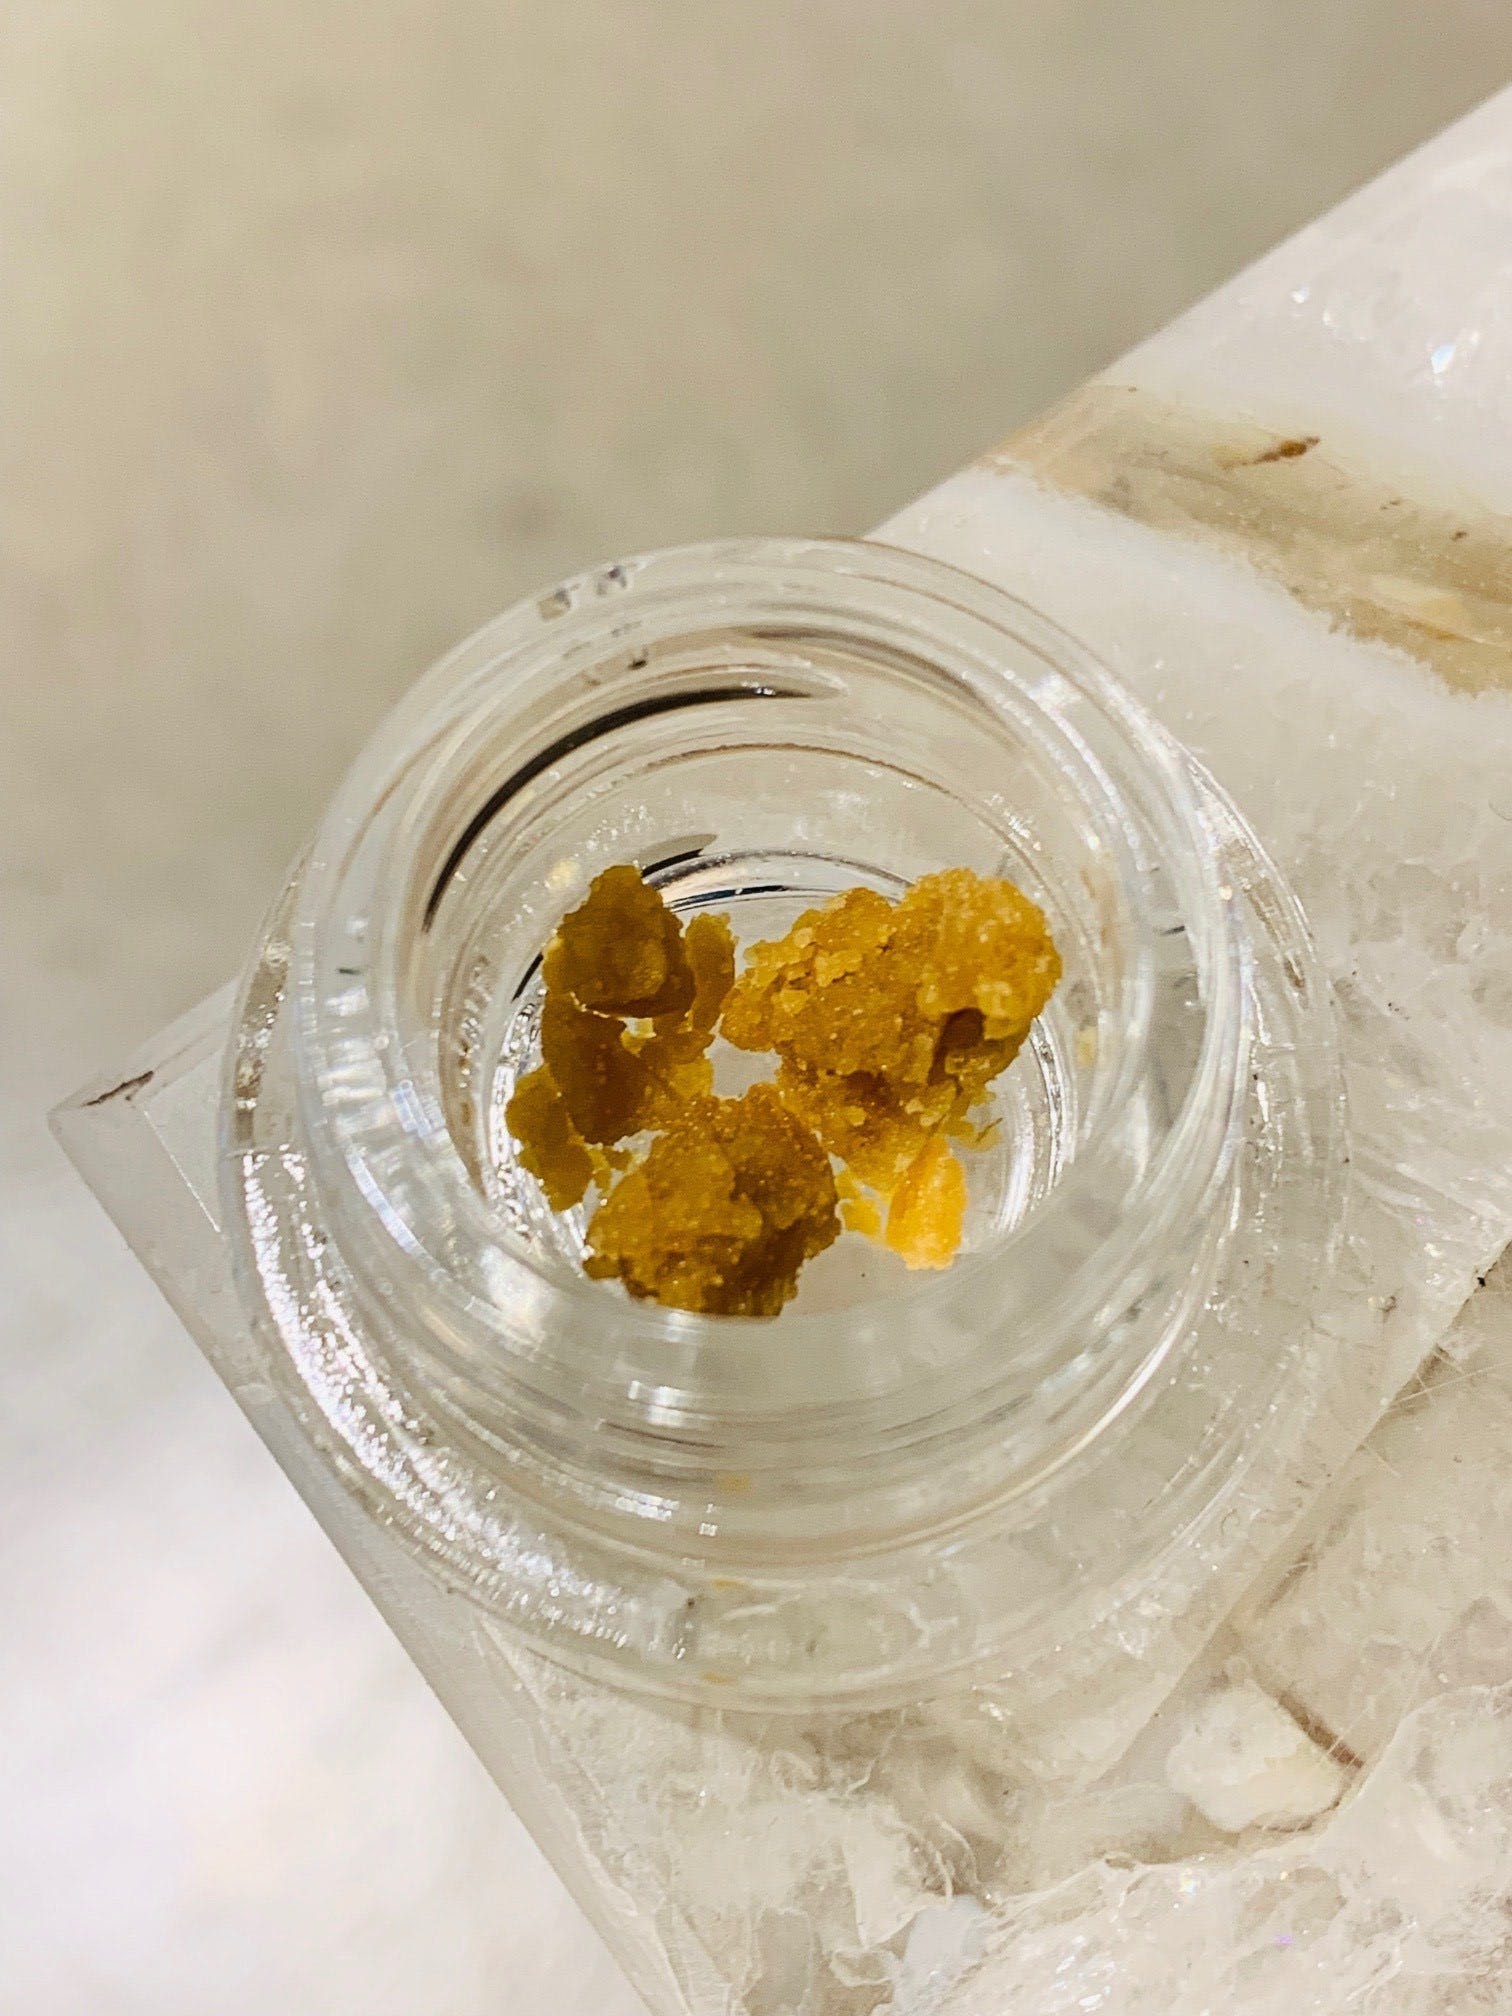 concentrate-chaos-kush-wax-tranquility-thc-84-62-25-cbd-0-23-25